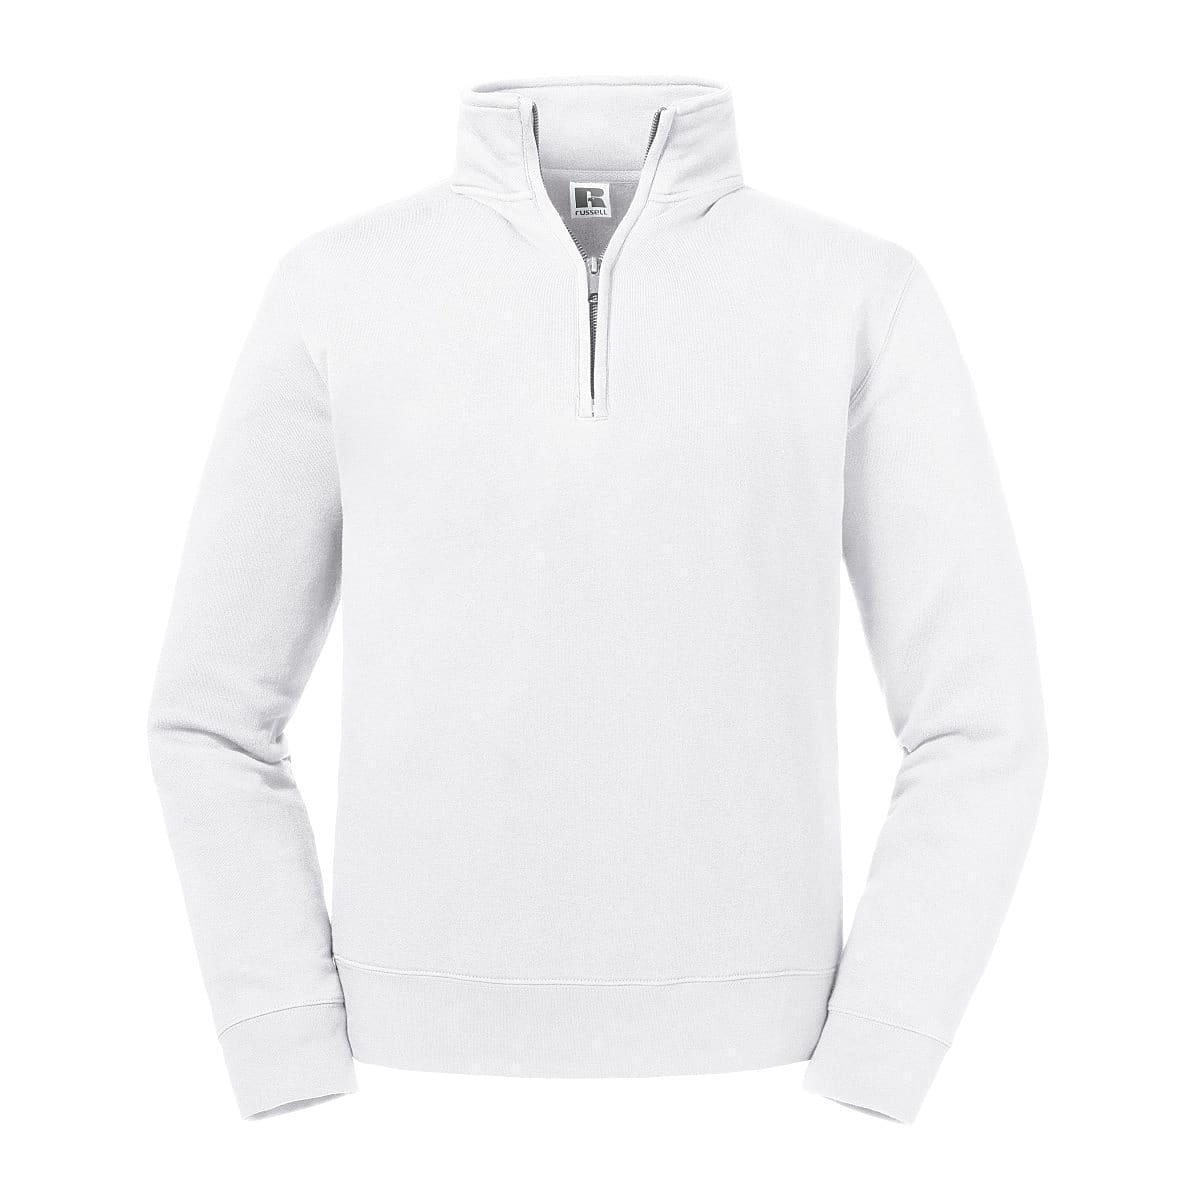 Russell Authentic 1/4 Zip Sweater in White (Product Code: R270M)